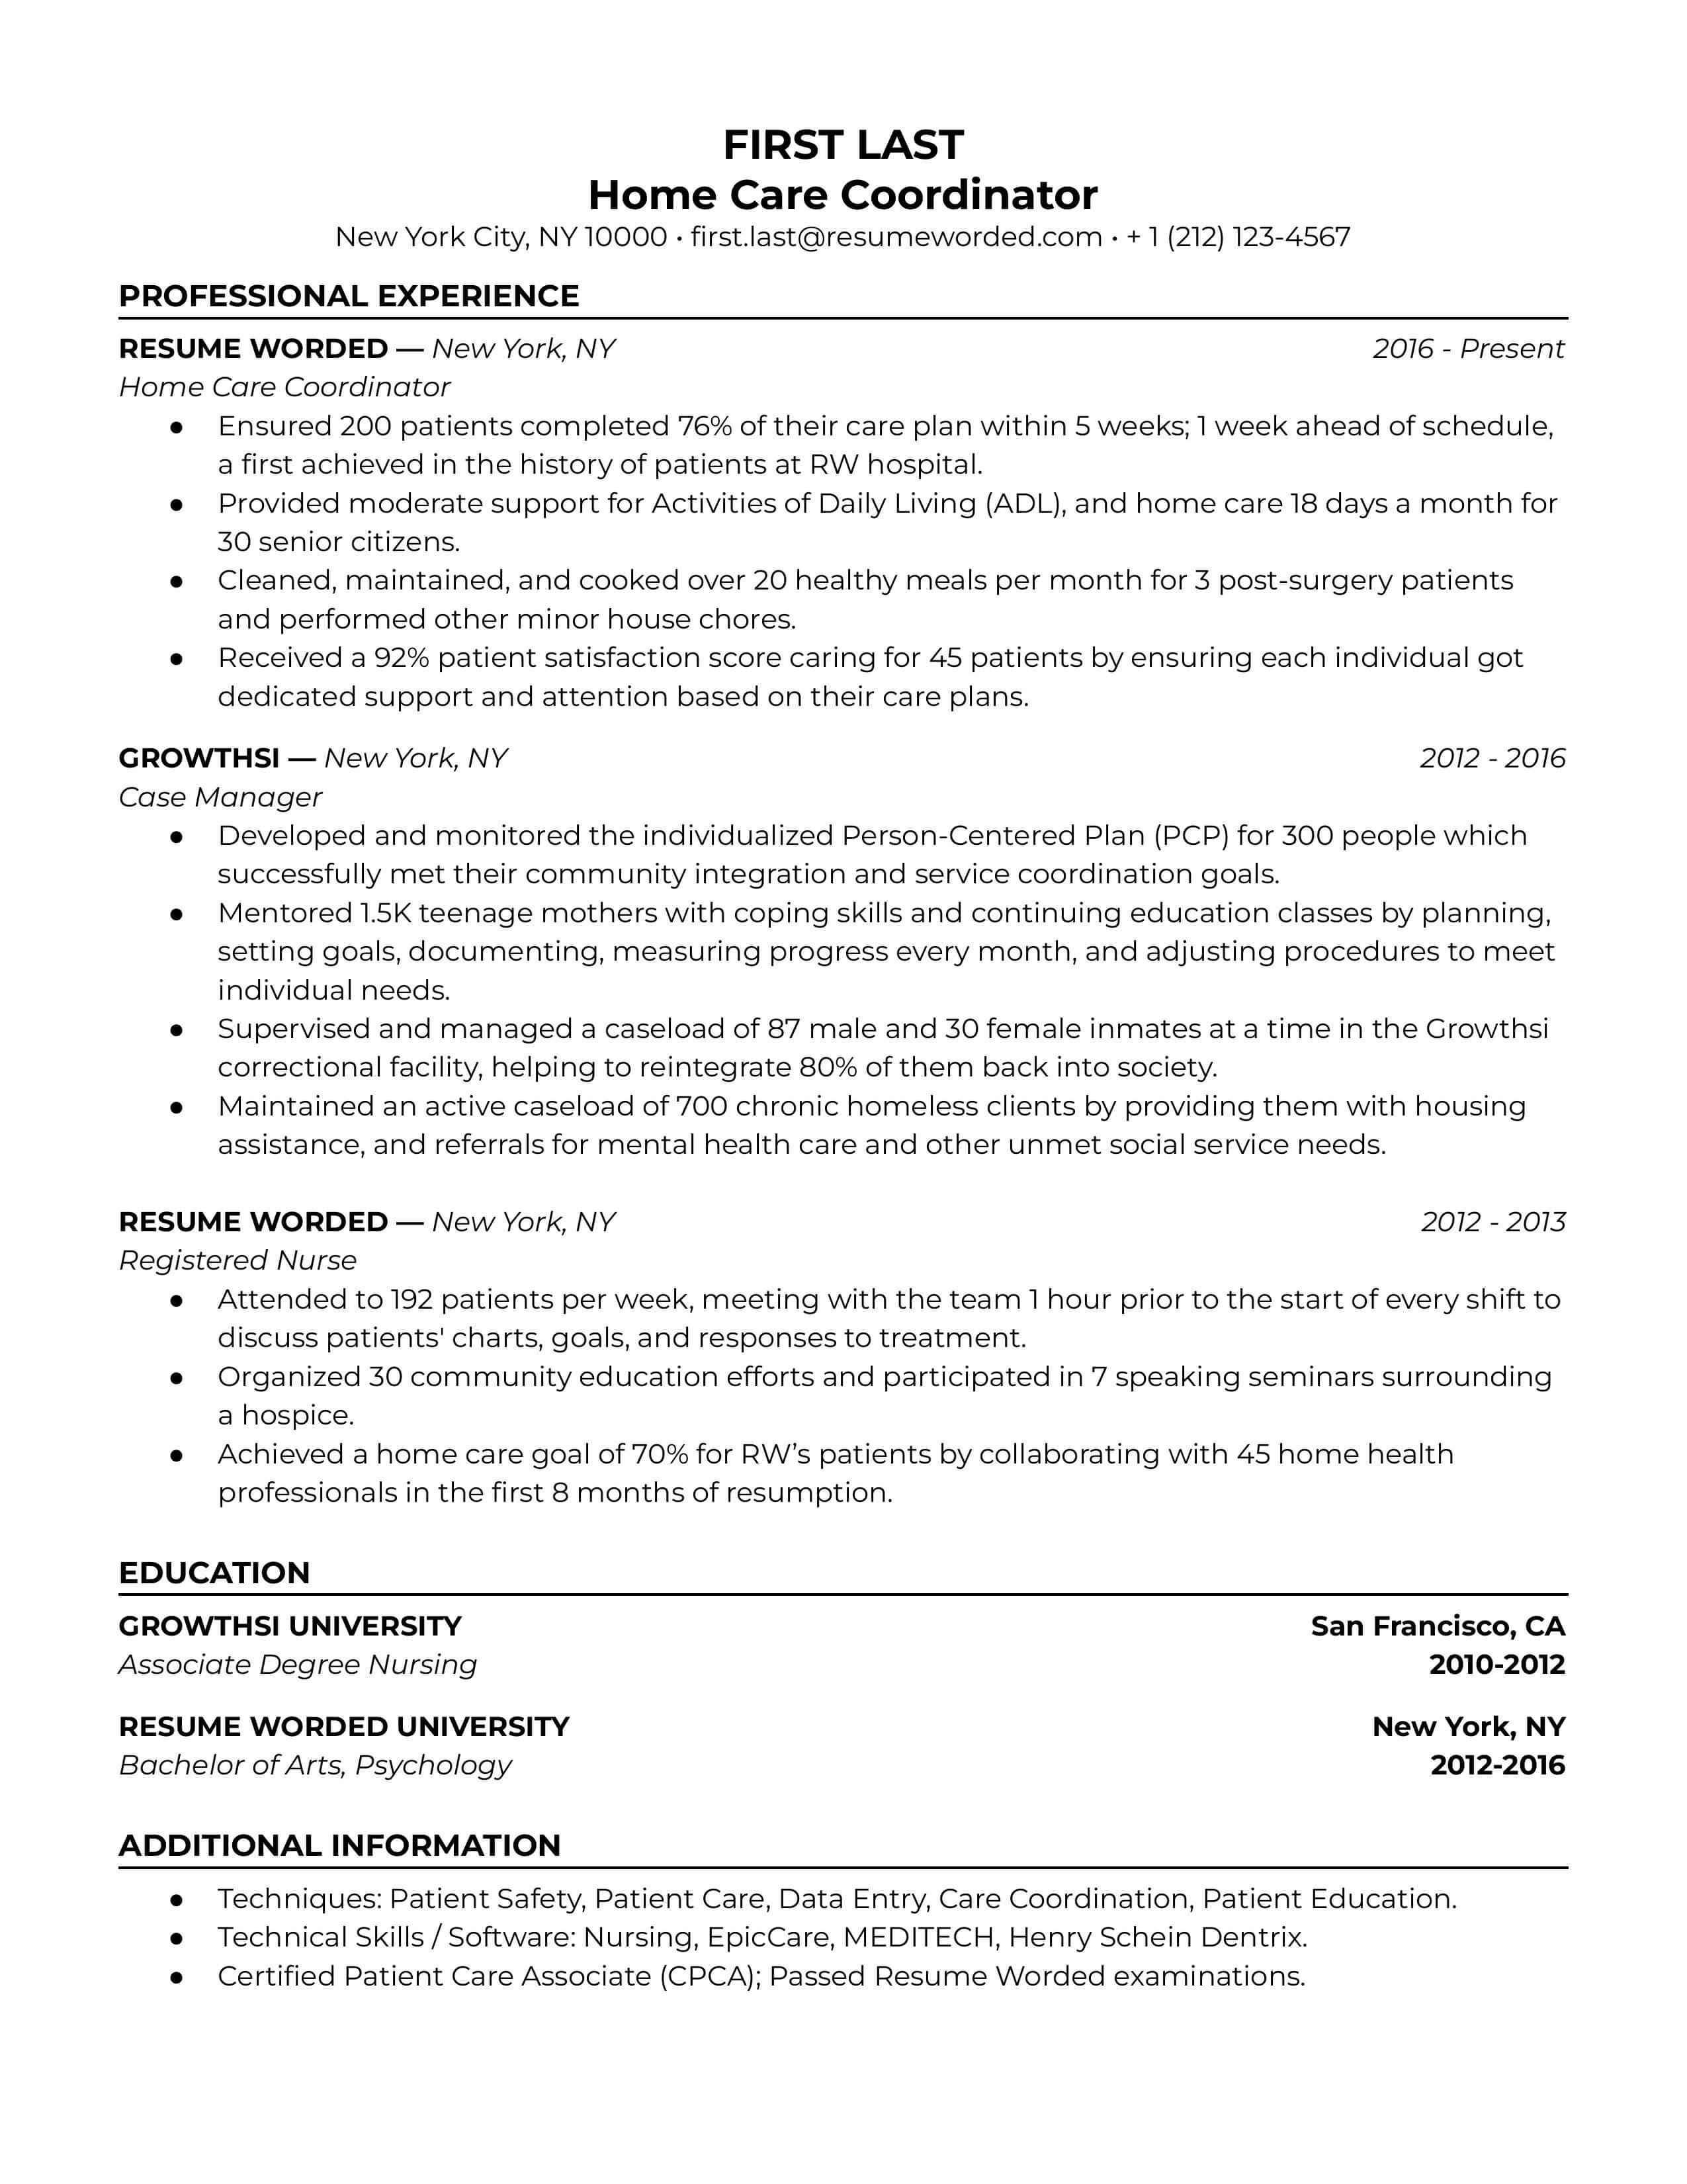 An organized and detailed CV for Home Care Coordinator roles.